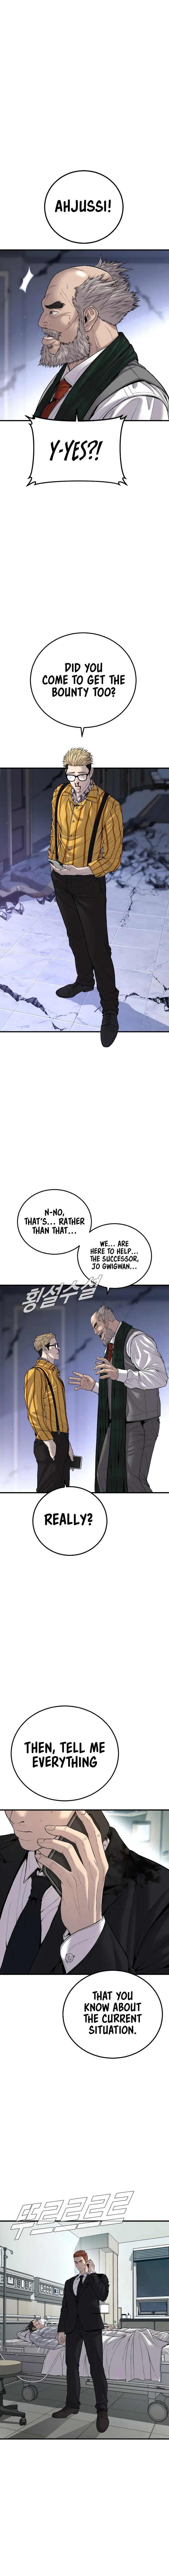 Manager Kim - Chapter 101 Page 8